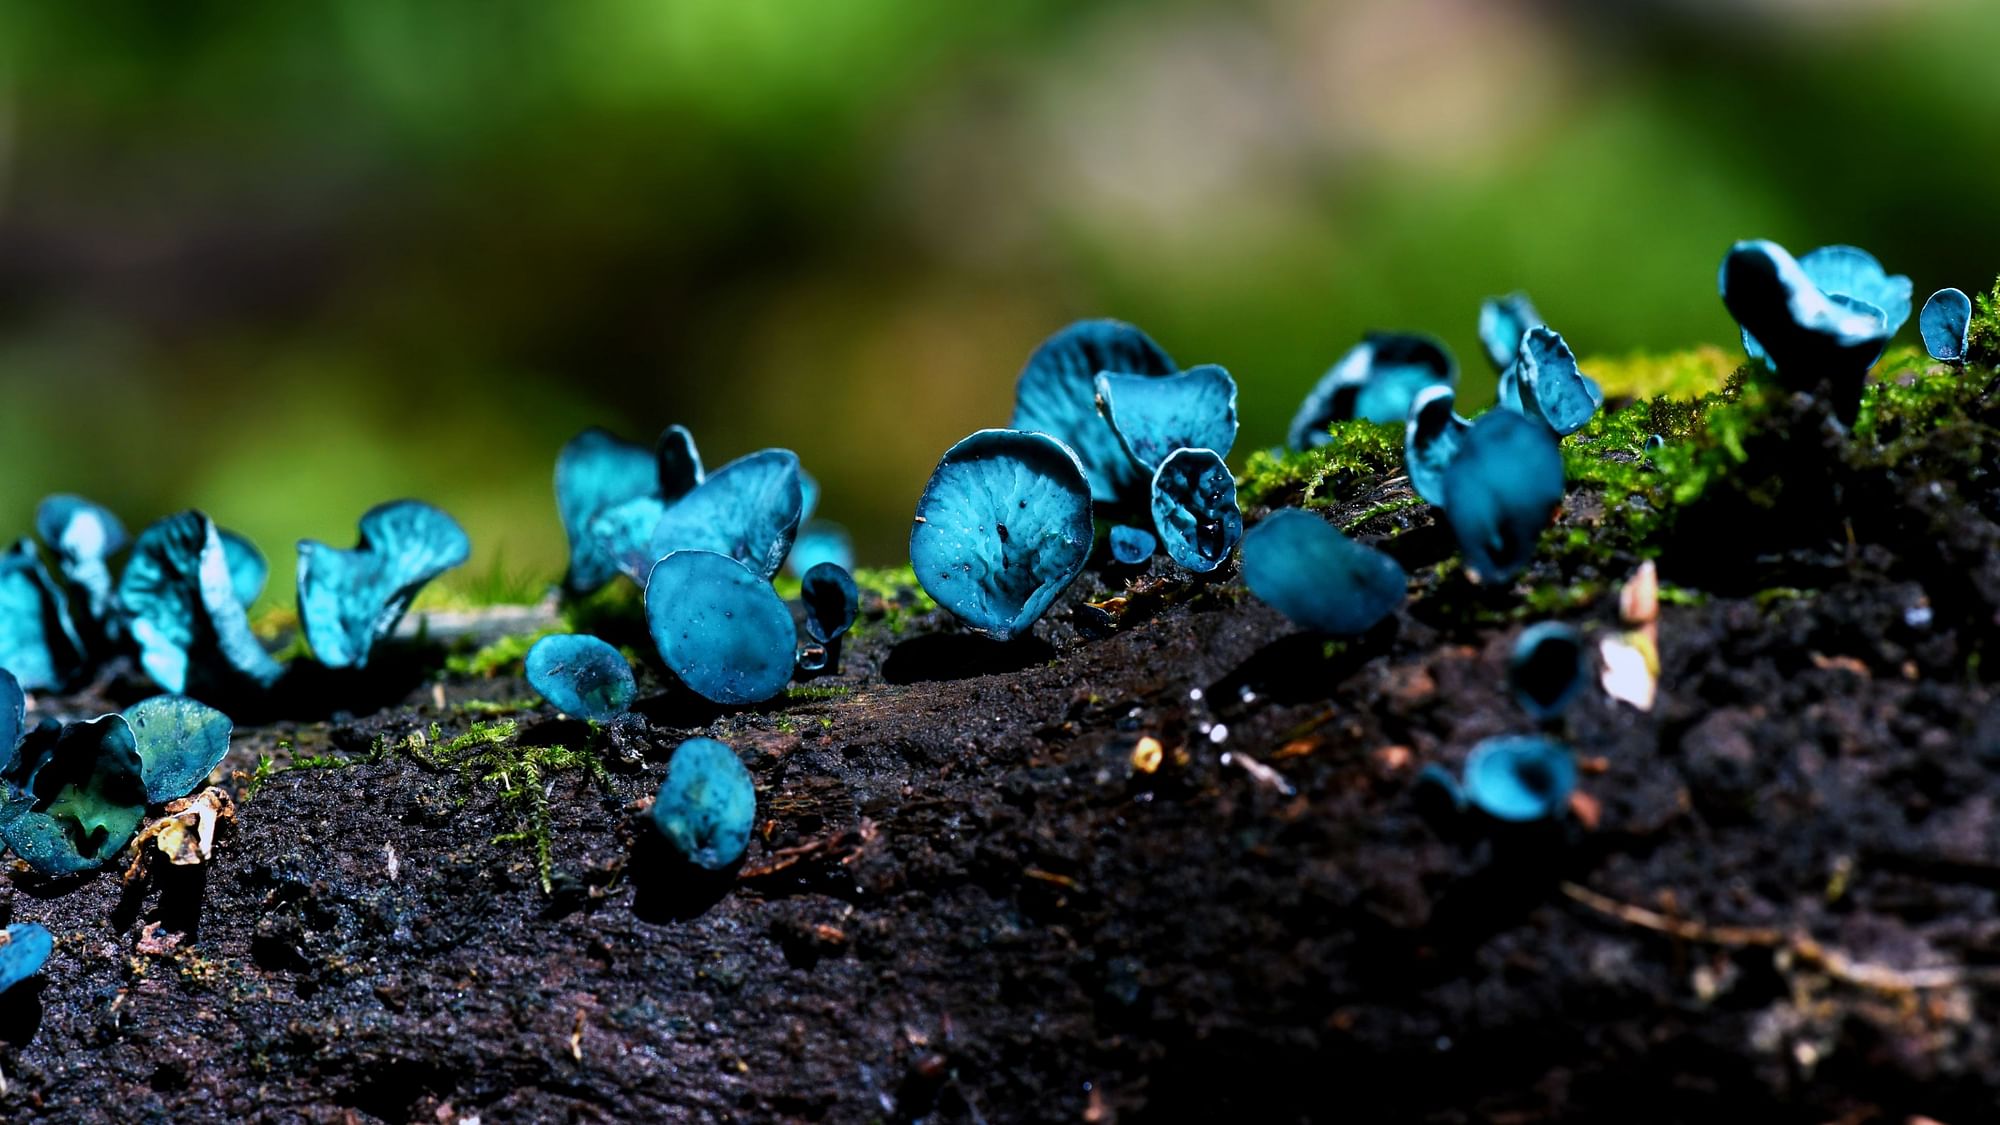 <div class="paragraphs"><p>Chlorociboria aeruginascens, commonly known as the green elfcup, photographed in Nanjiluo of Diqing Tibetan Autonomous Prefecture, Yunnan Province. Yunnan is home to a wide variety of wild mushrooms due to its characteristic climate and natural landscape with multiple types of forests and soils.</p></div>